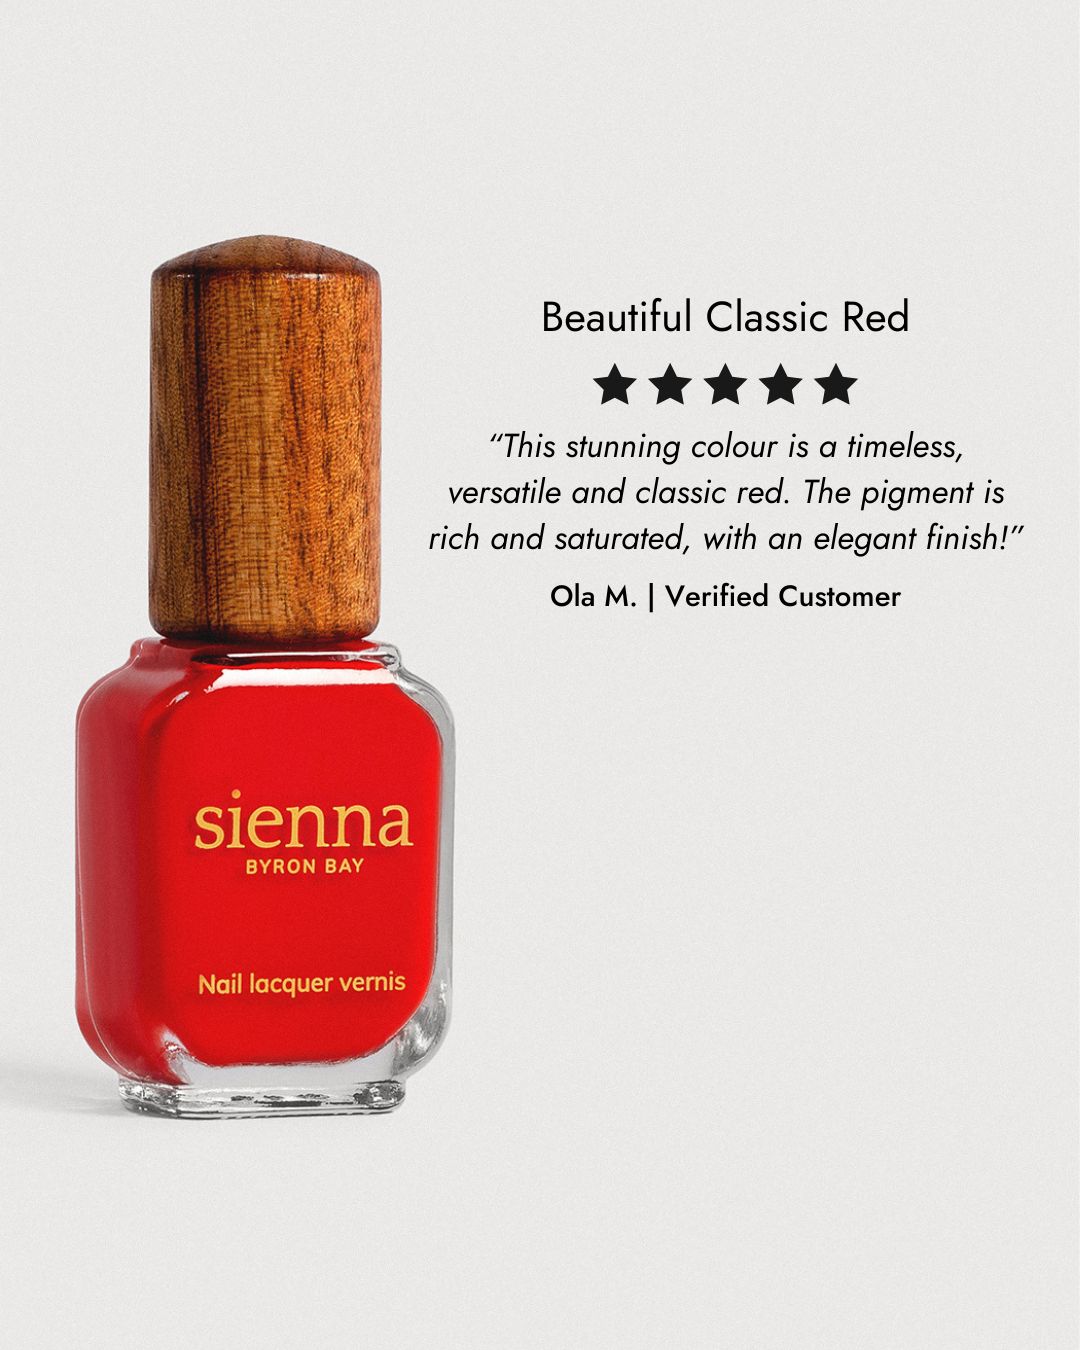 bright red nail polish glass bottle with 5 star review